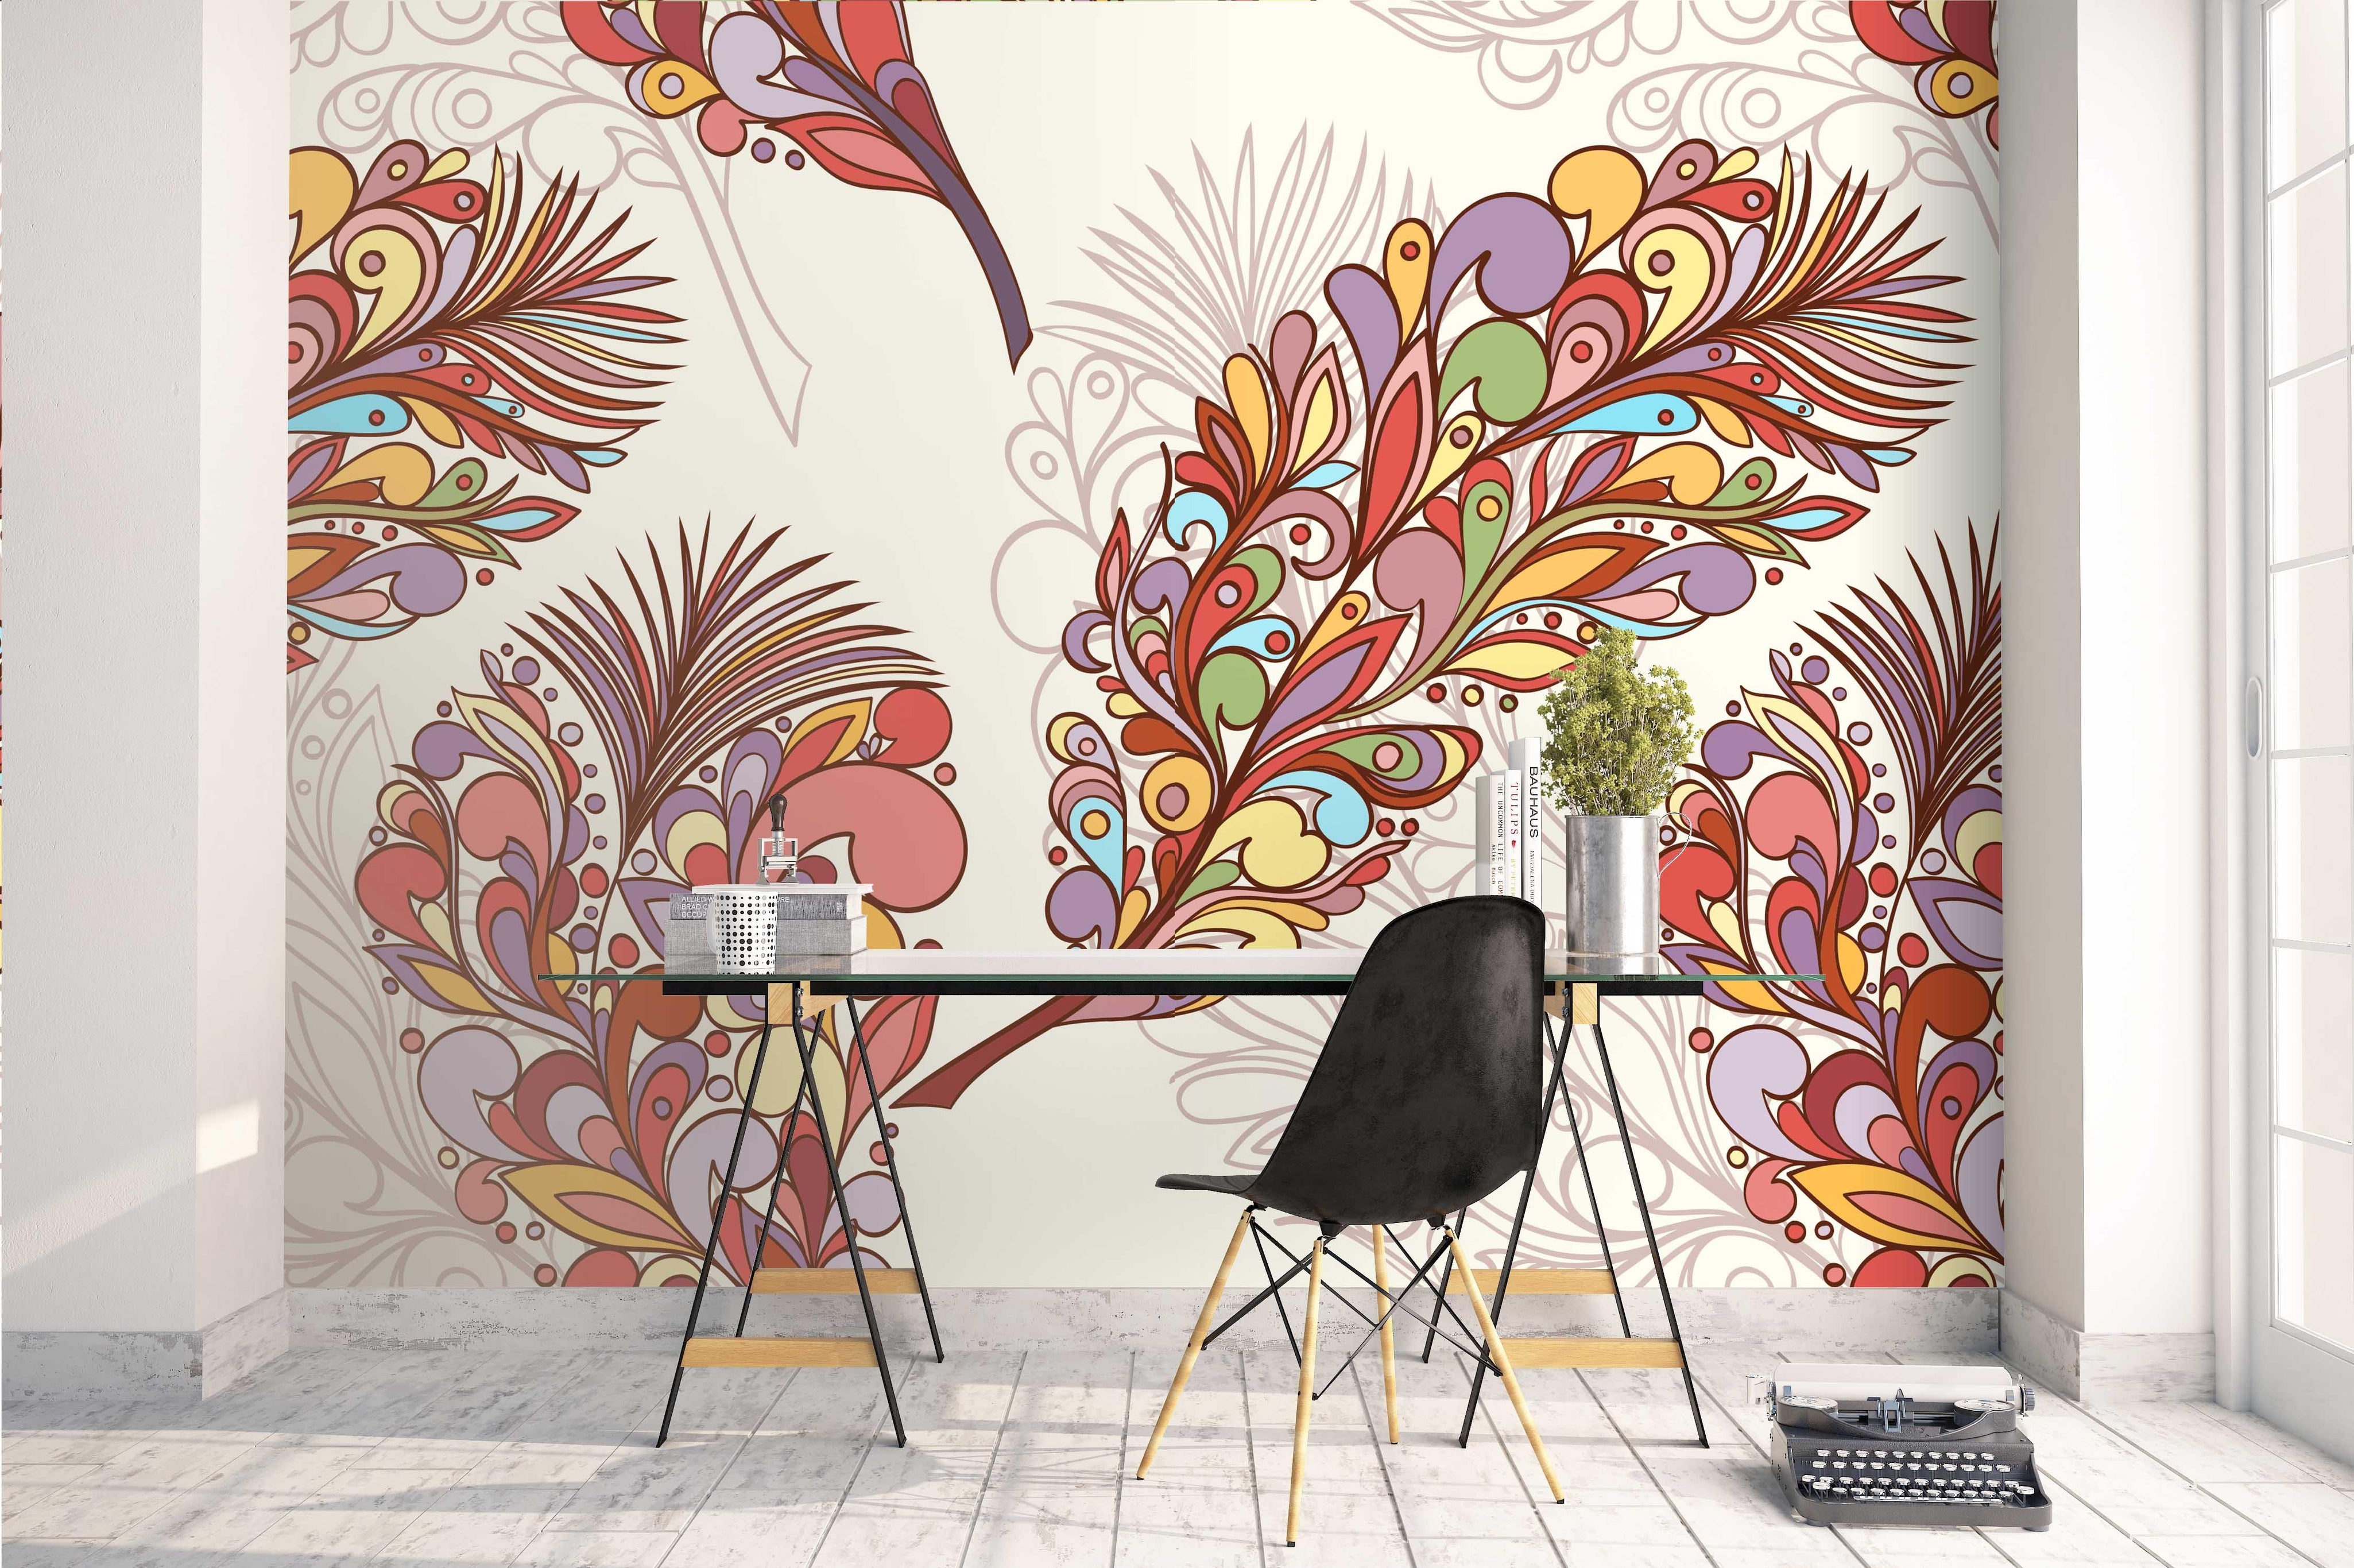 3D feather leaves wall mural wallpaper 01- Jess Art Decoration